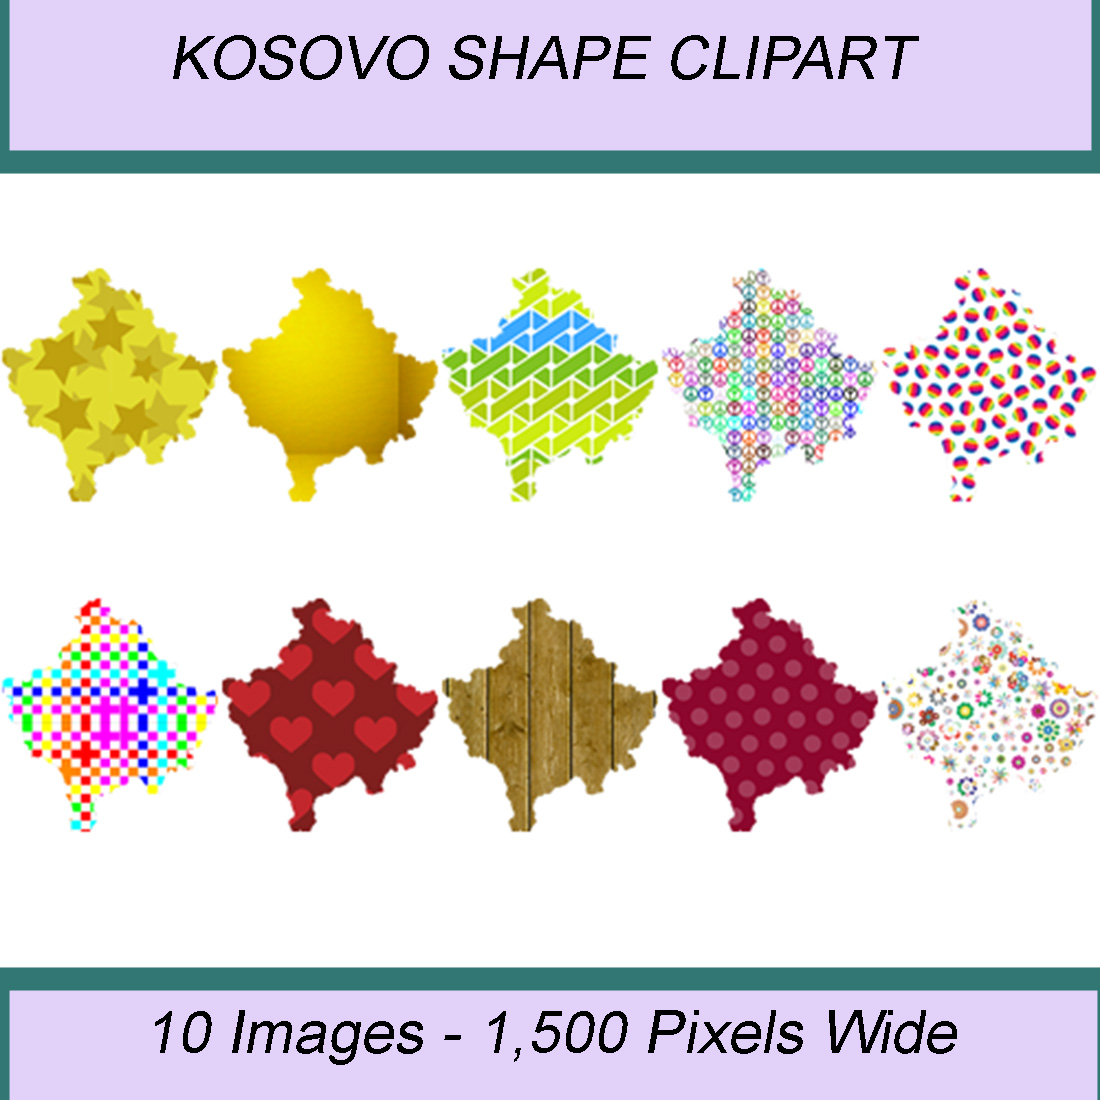 KOSOVO SHAPE CLIPART ICONS cover image.